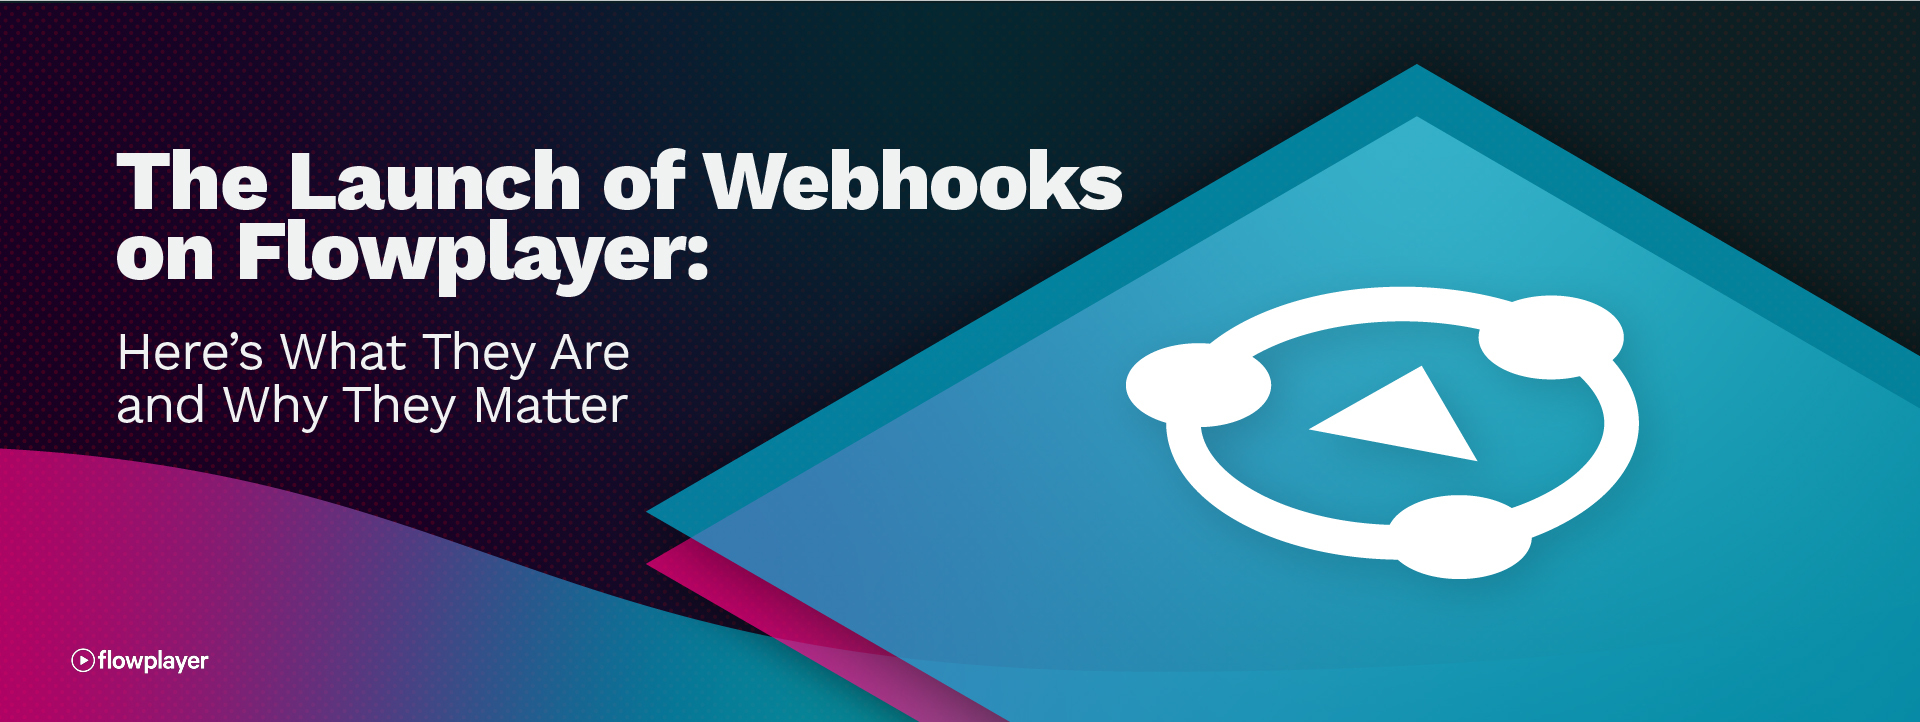 The Launch of Webhooks